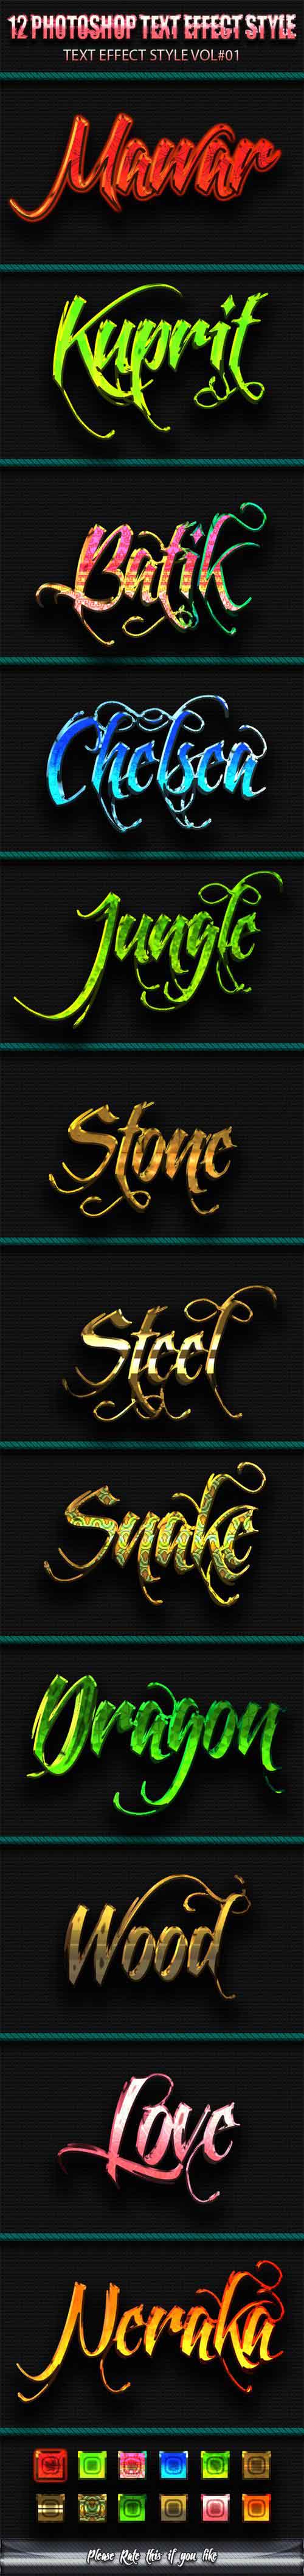 Graphicriver 12 Photoshop Text Effect Styles Vol 1 11039851